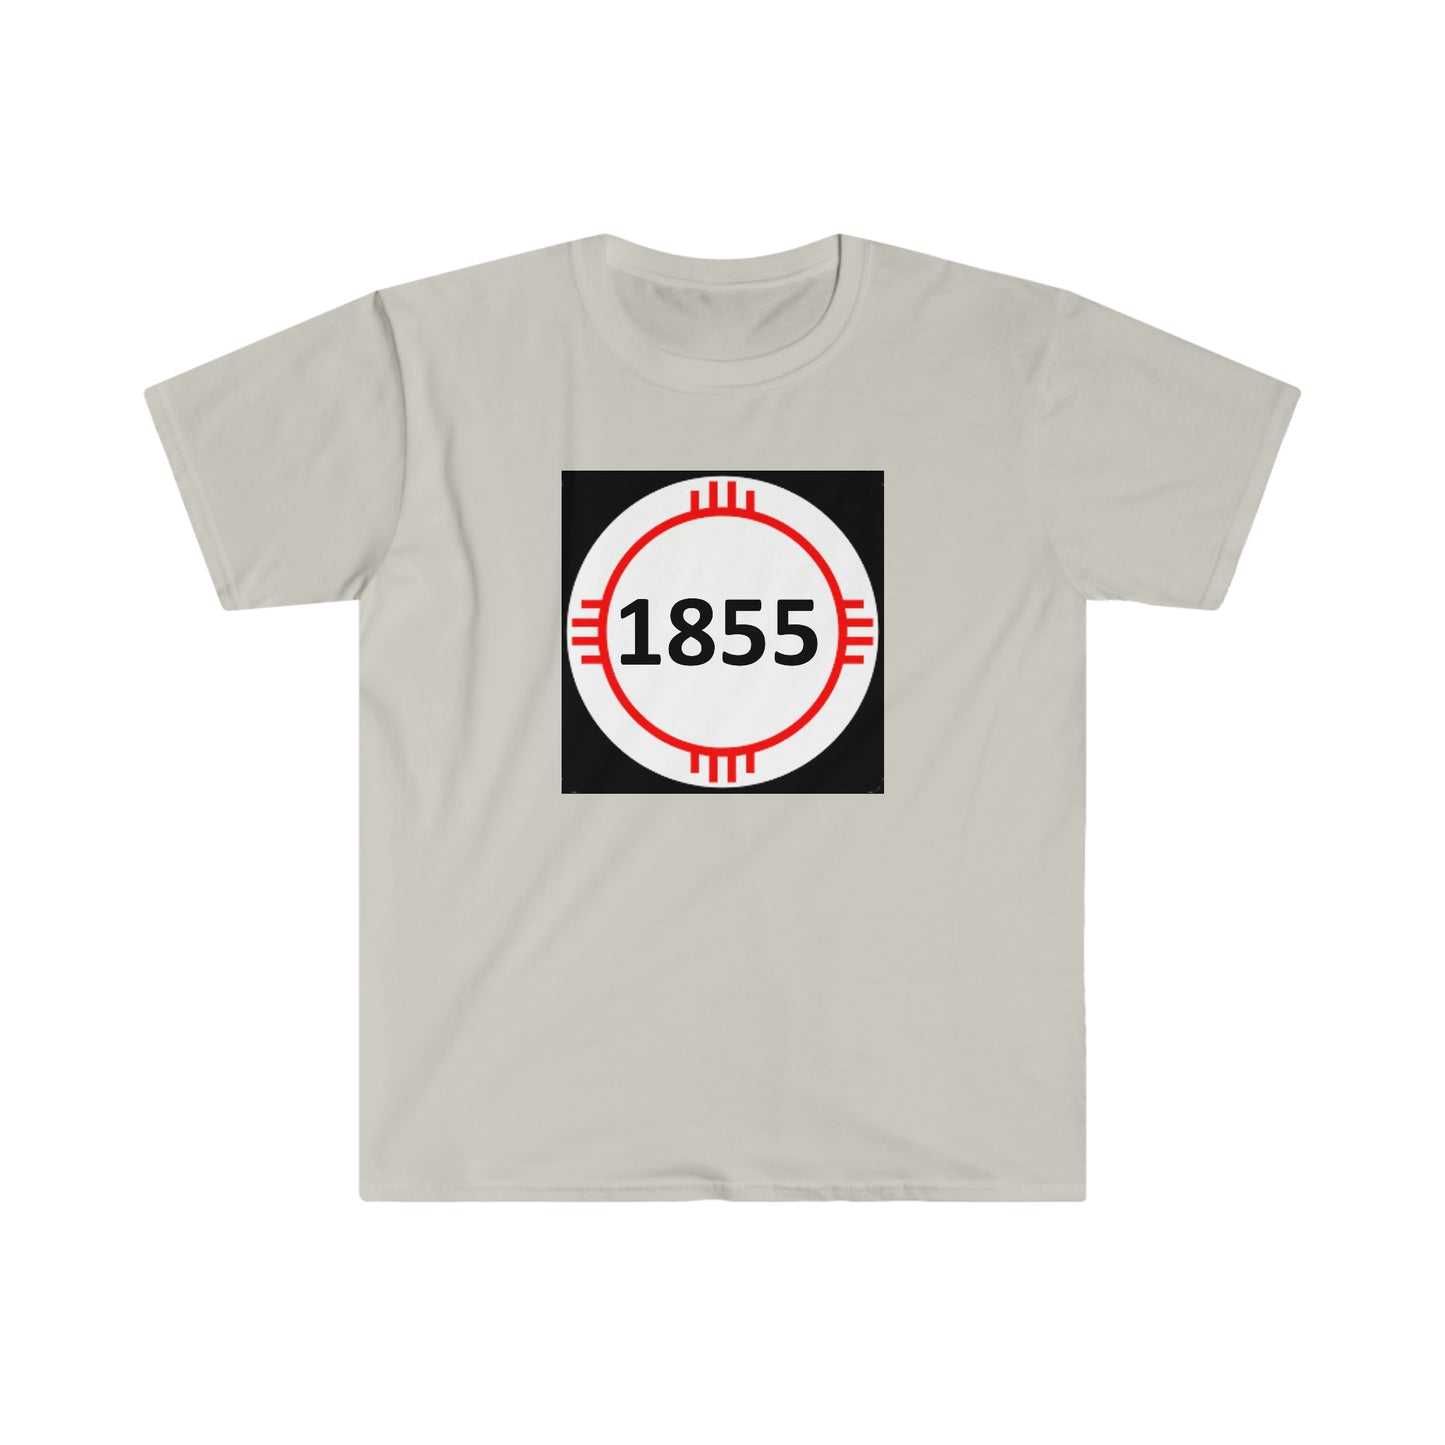 New Mexico State Road 1855 - T-Shirt